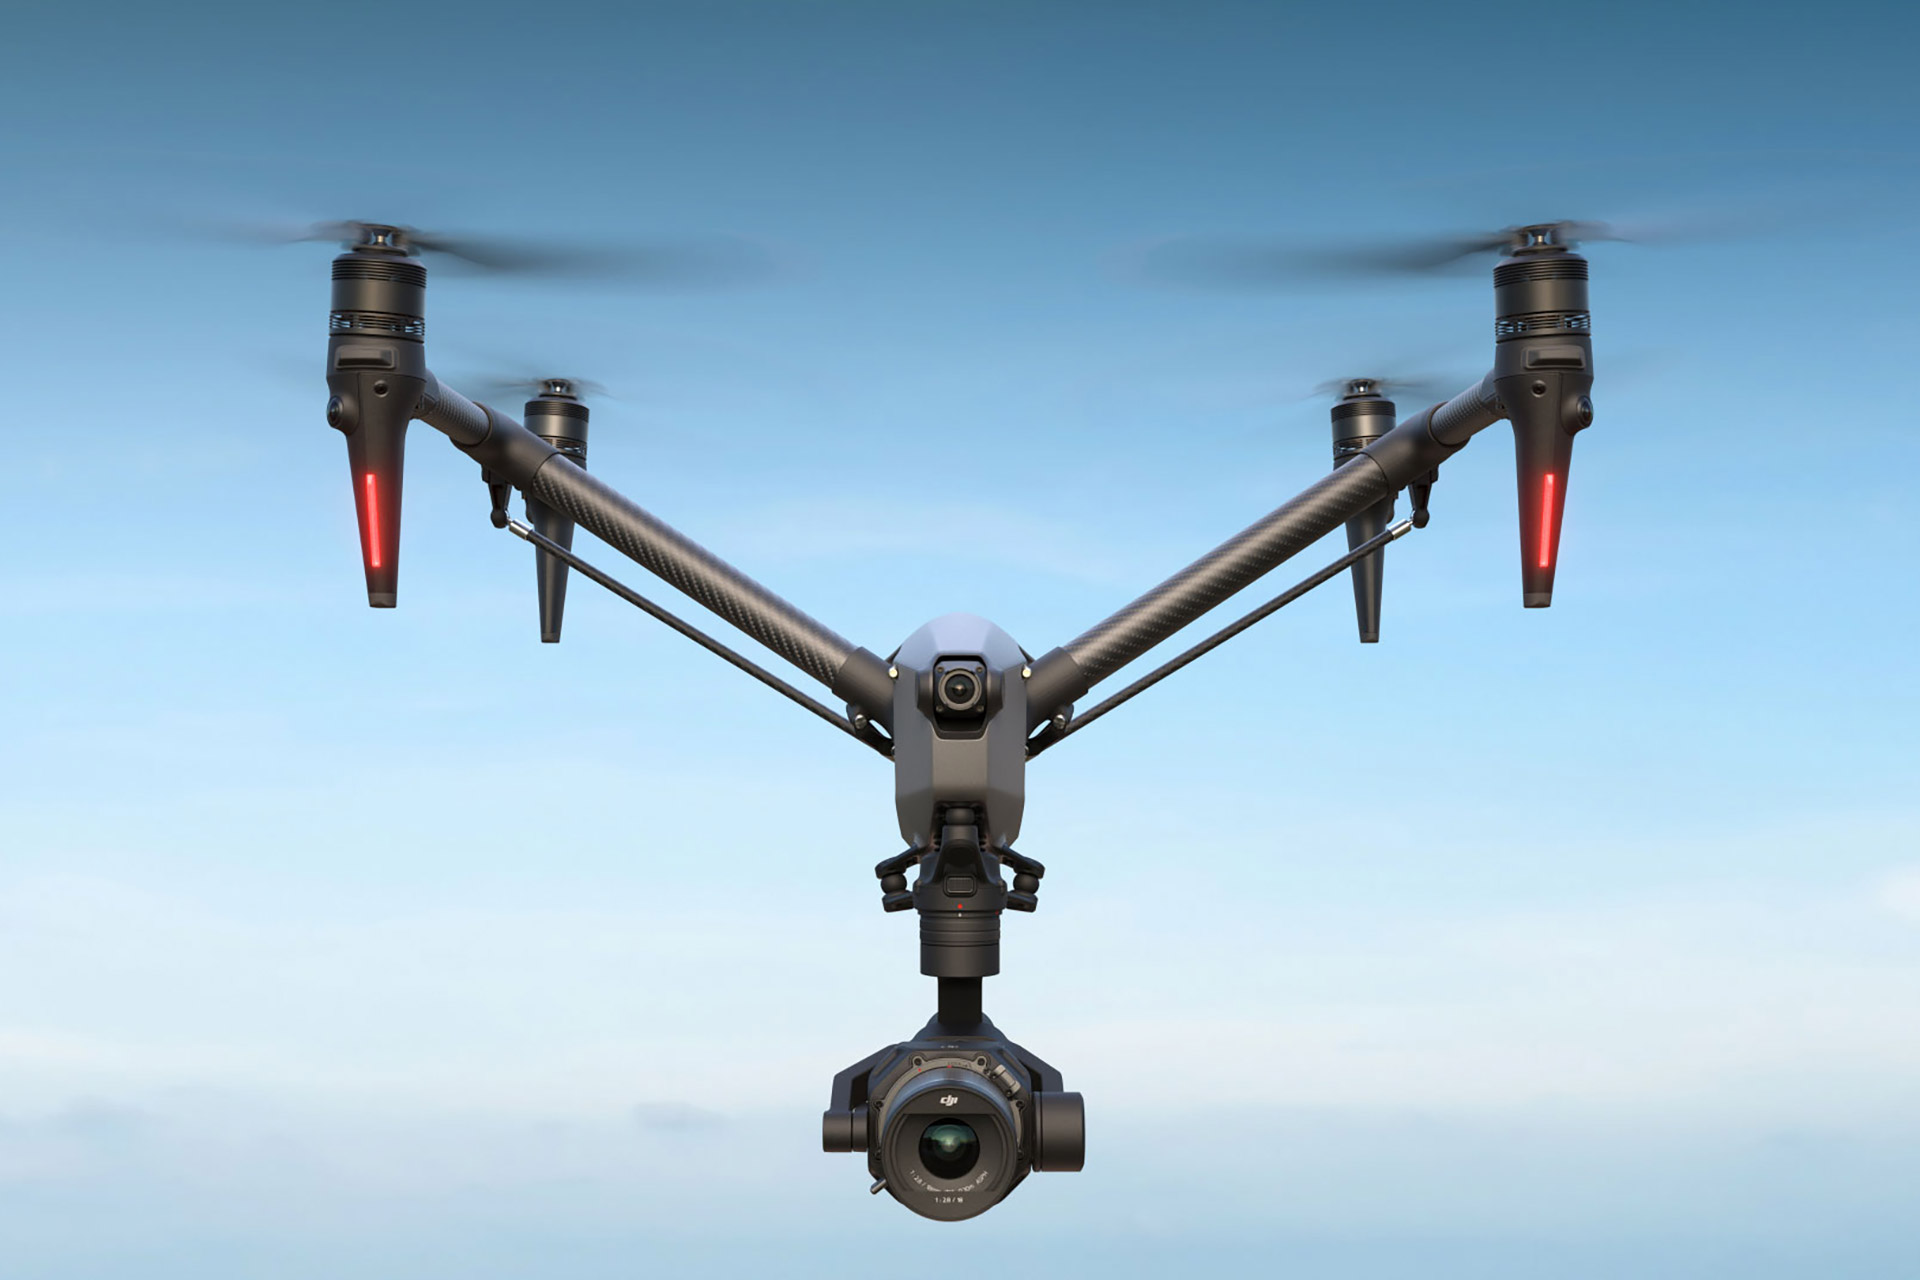 17 FEATURES OF THE DJI INSPIRE 3 